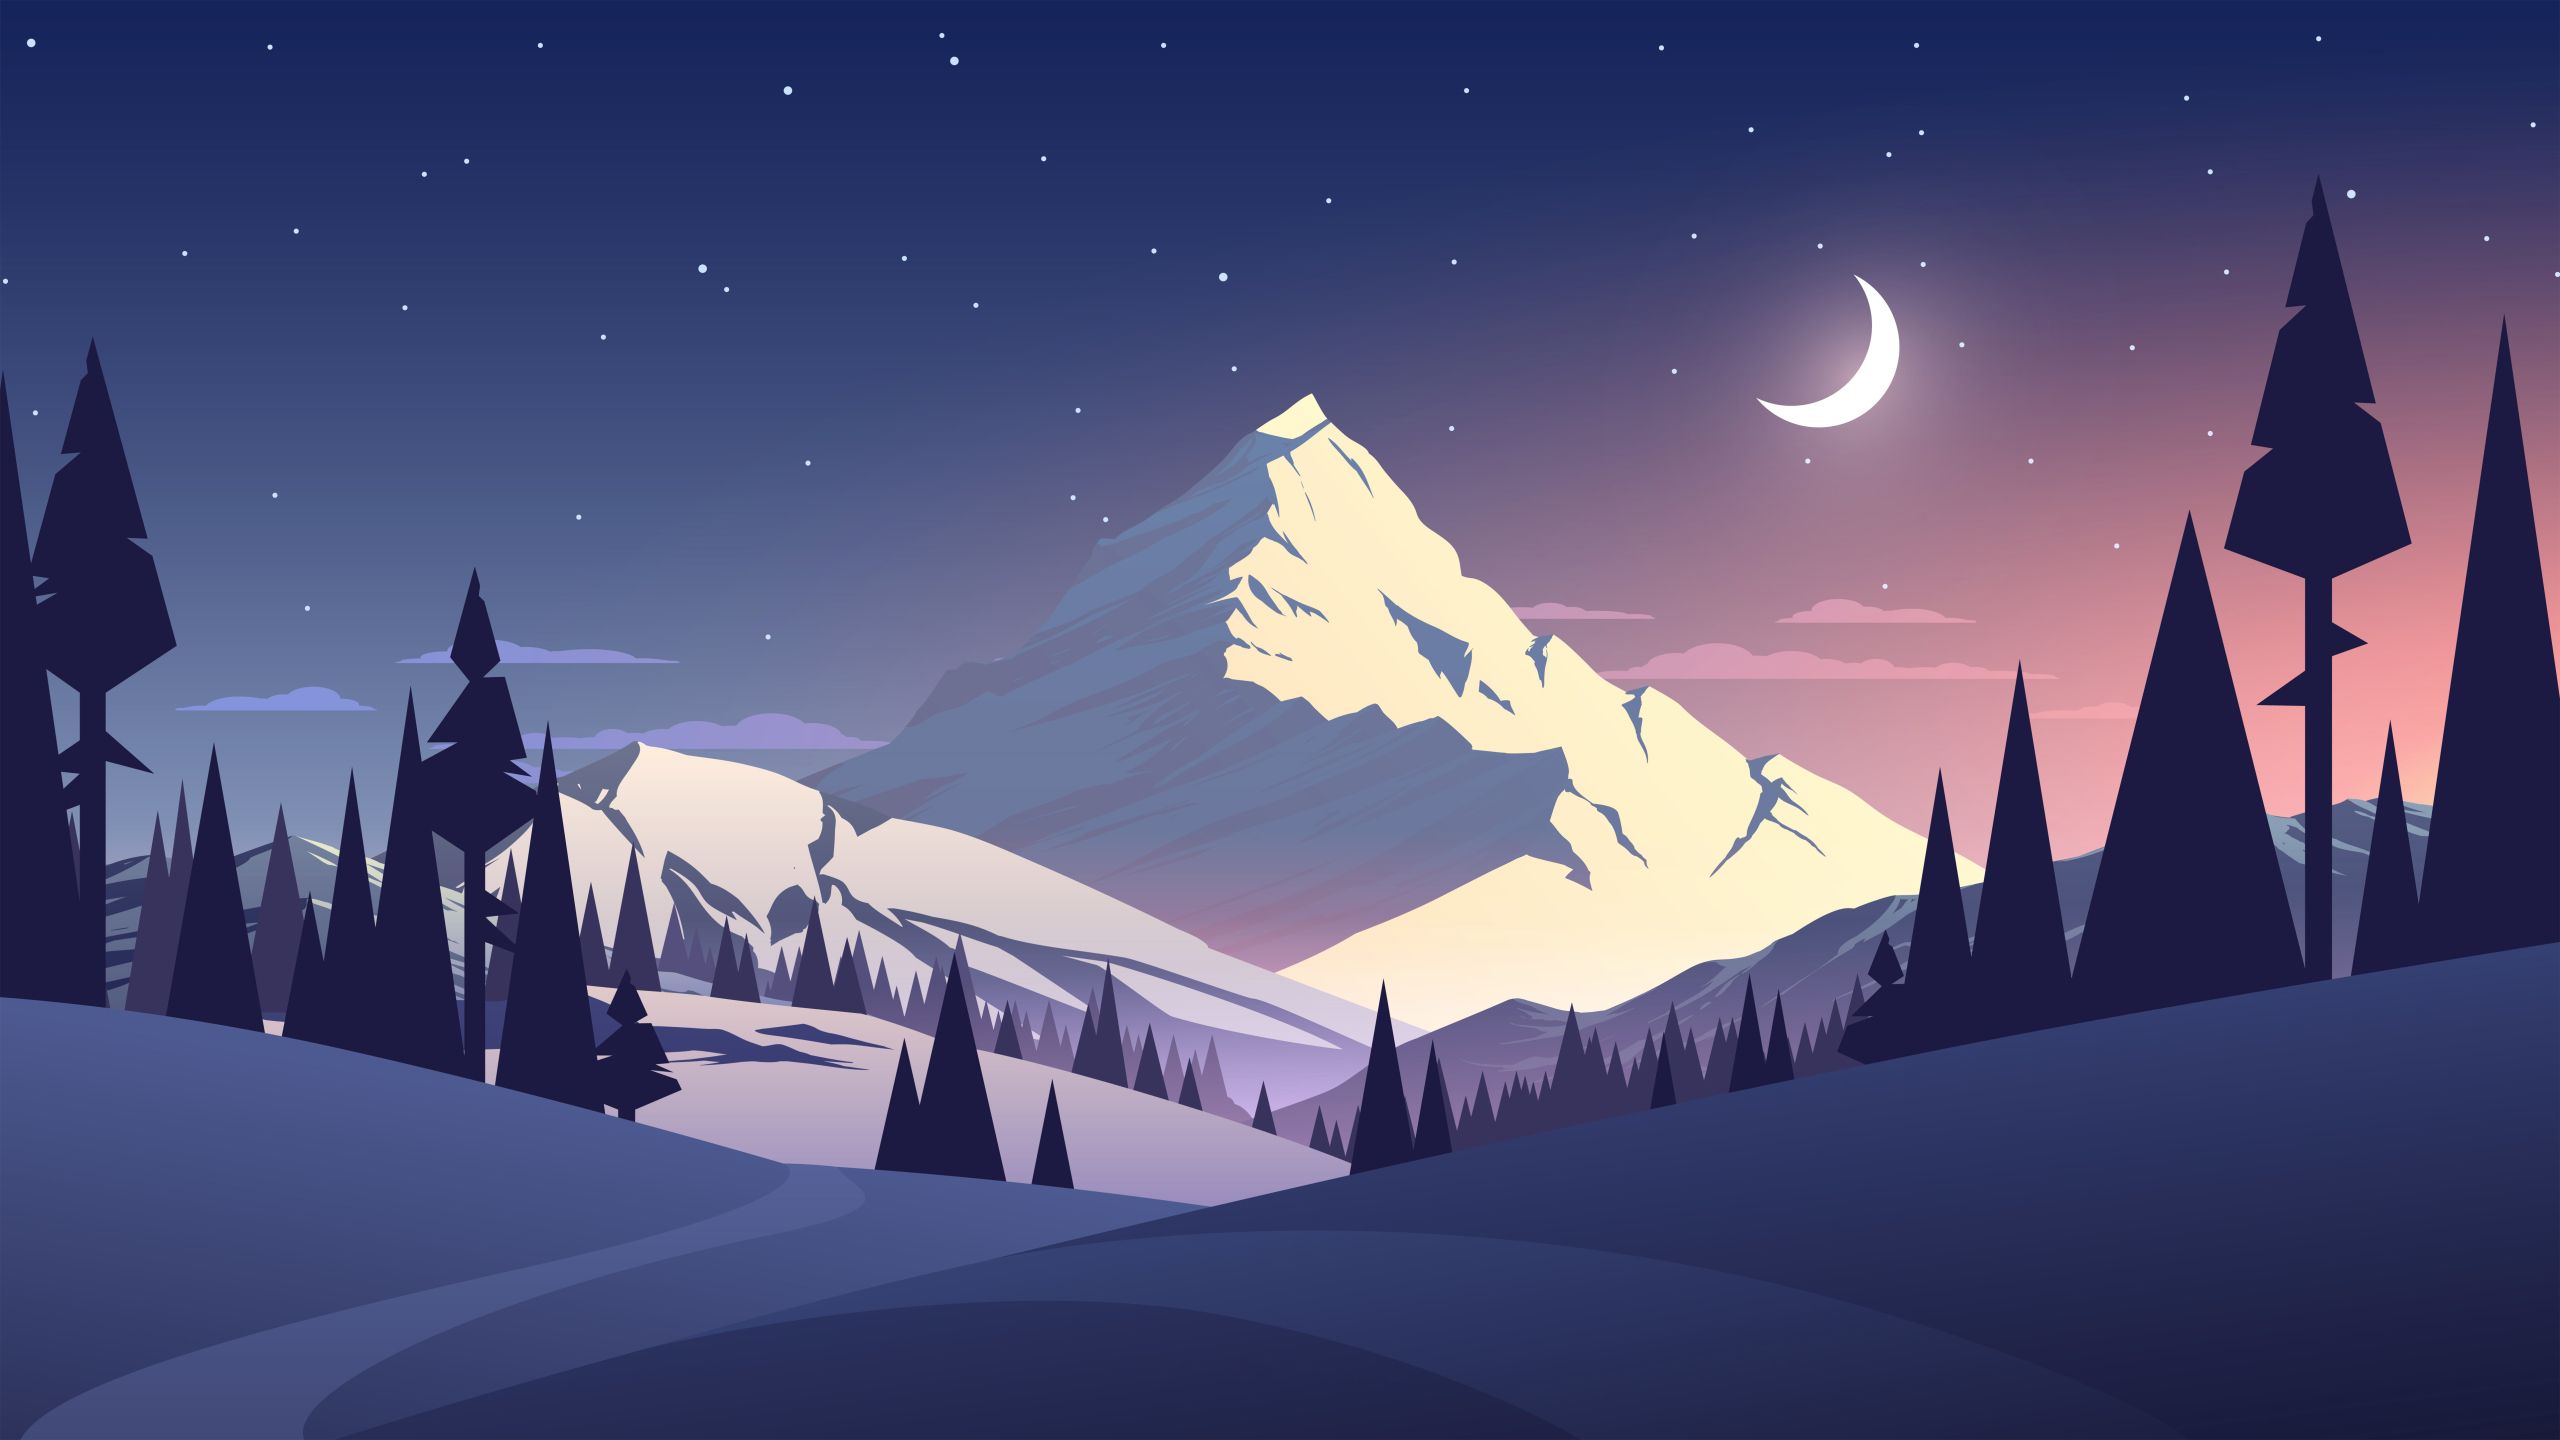 Night Mountains Summer Illustration 1440P Resolution Wallpaper, HD Artist 4K Wallpaper, Image, Photo and Background